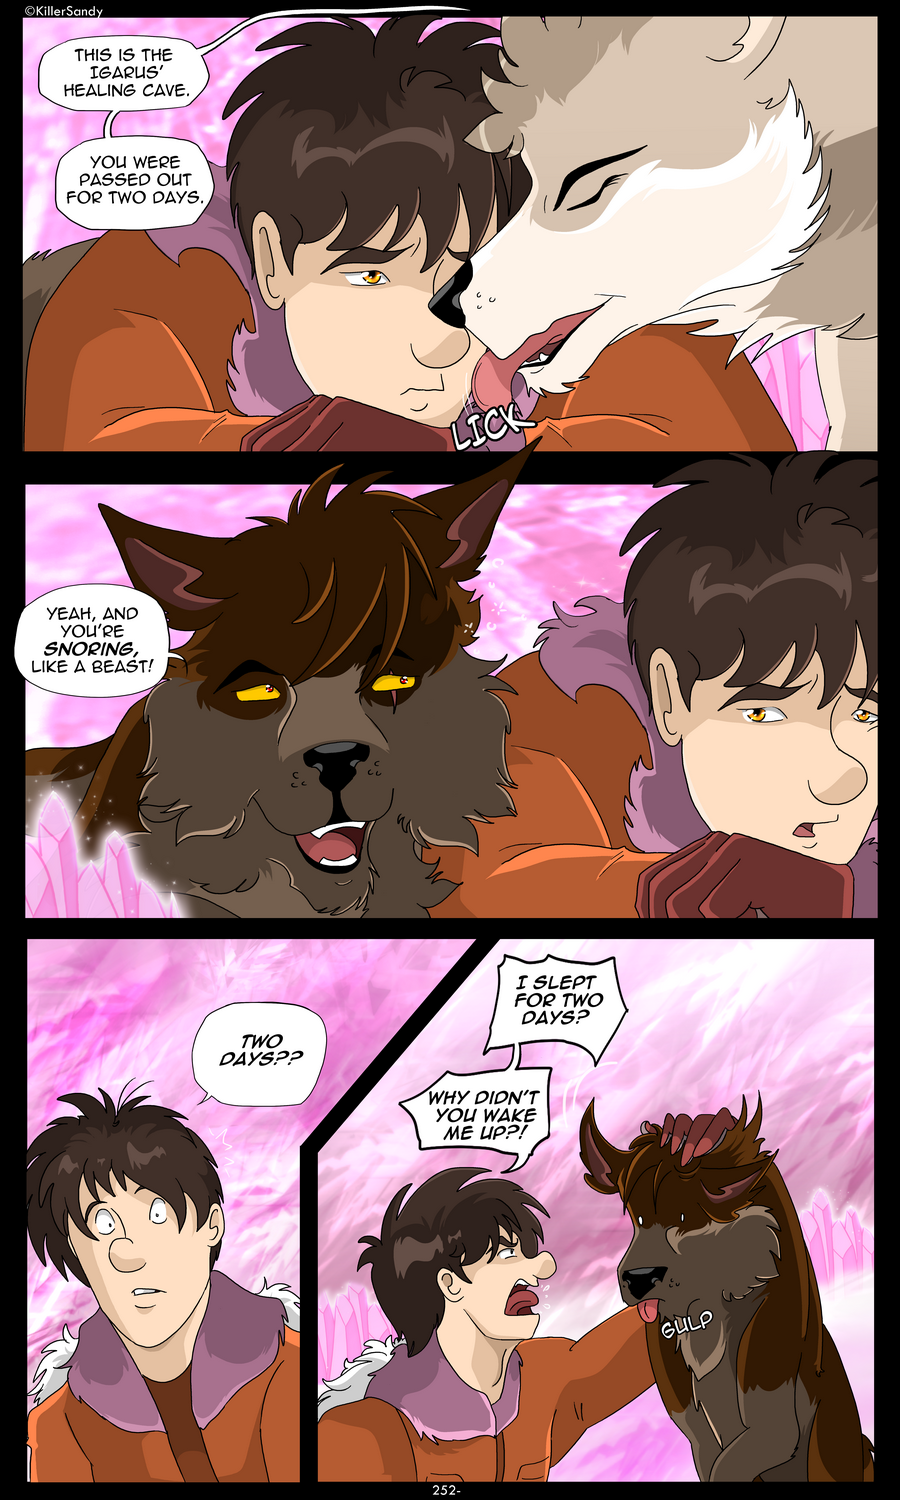 The Prince of the Moonlight Stone page 252